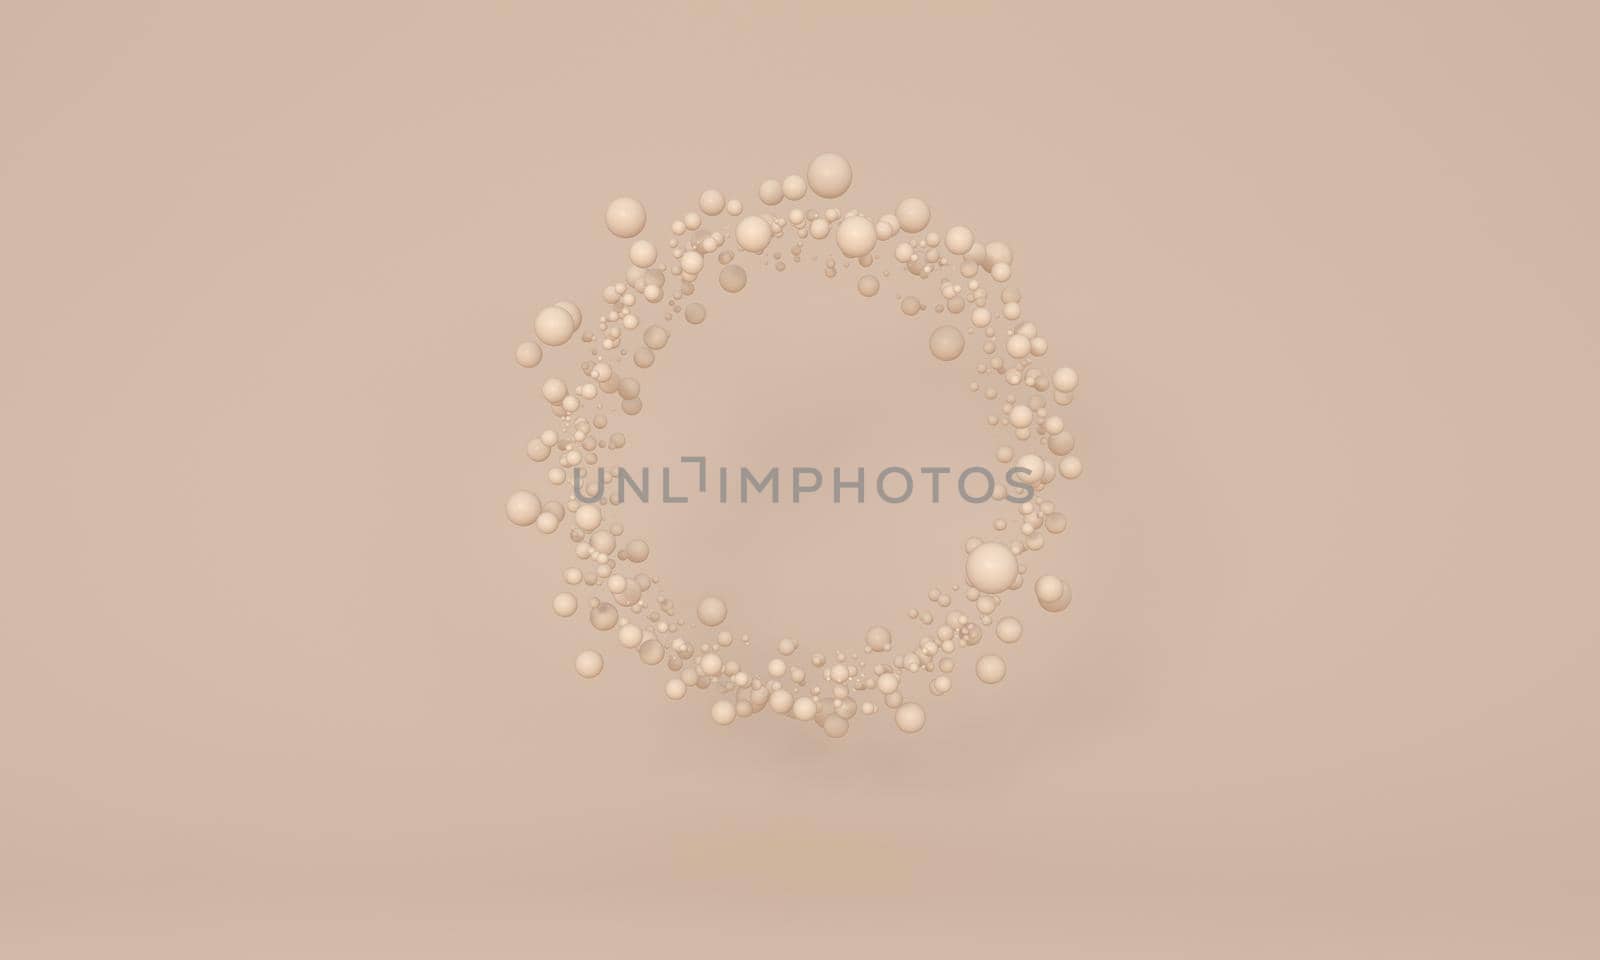 Skin colour floating spheres forming a circle on studio background. Make up. 3d rendering.